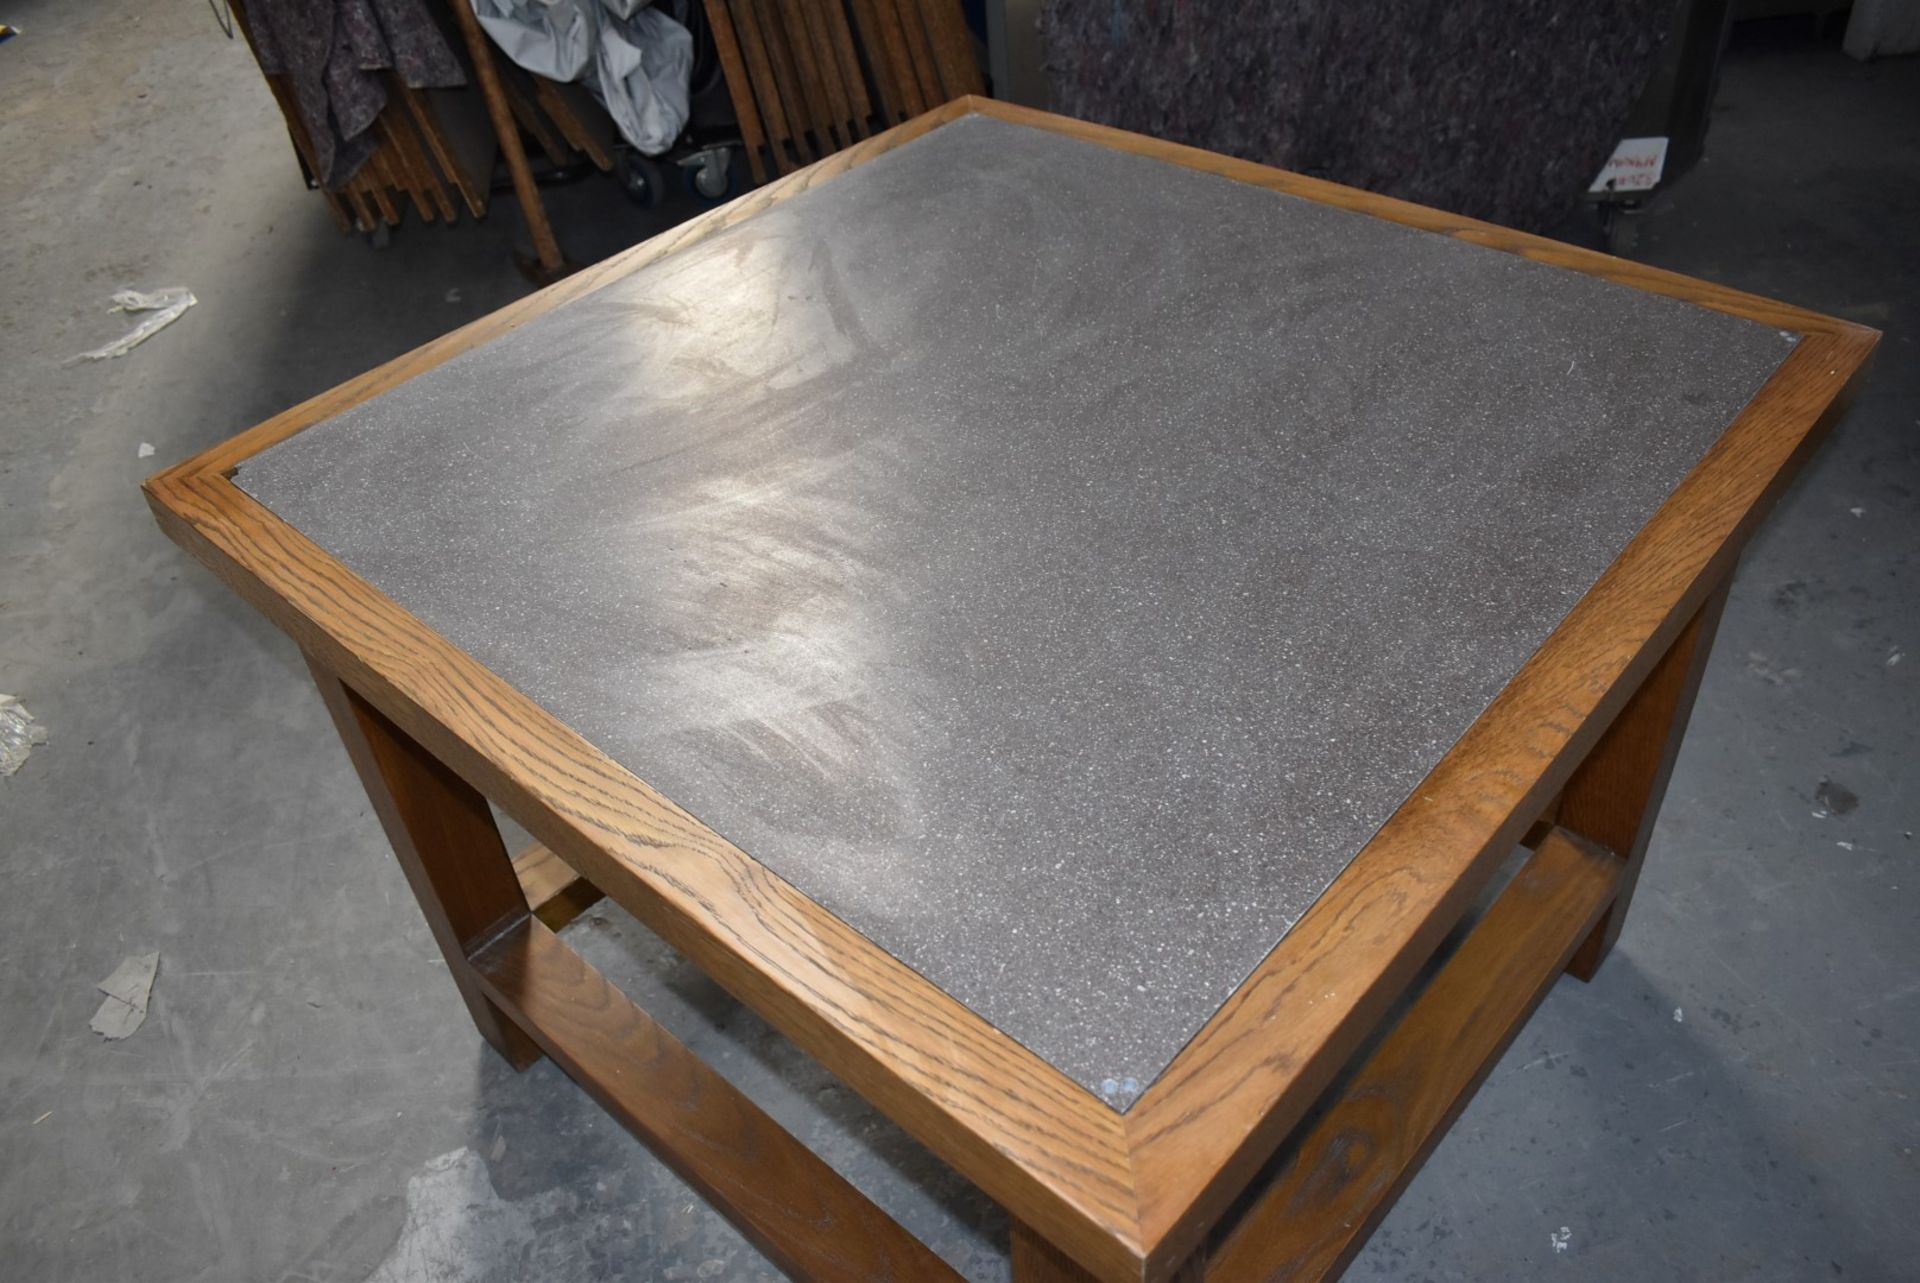 1 x Solid Oak Table With a Stone Insert Top - H77 x W100 x D100 cms - Image 6 of 9